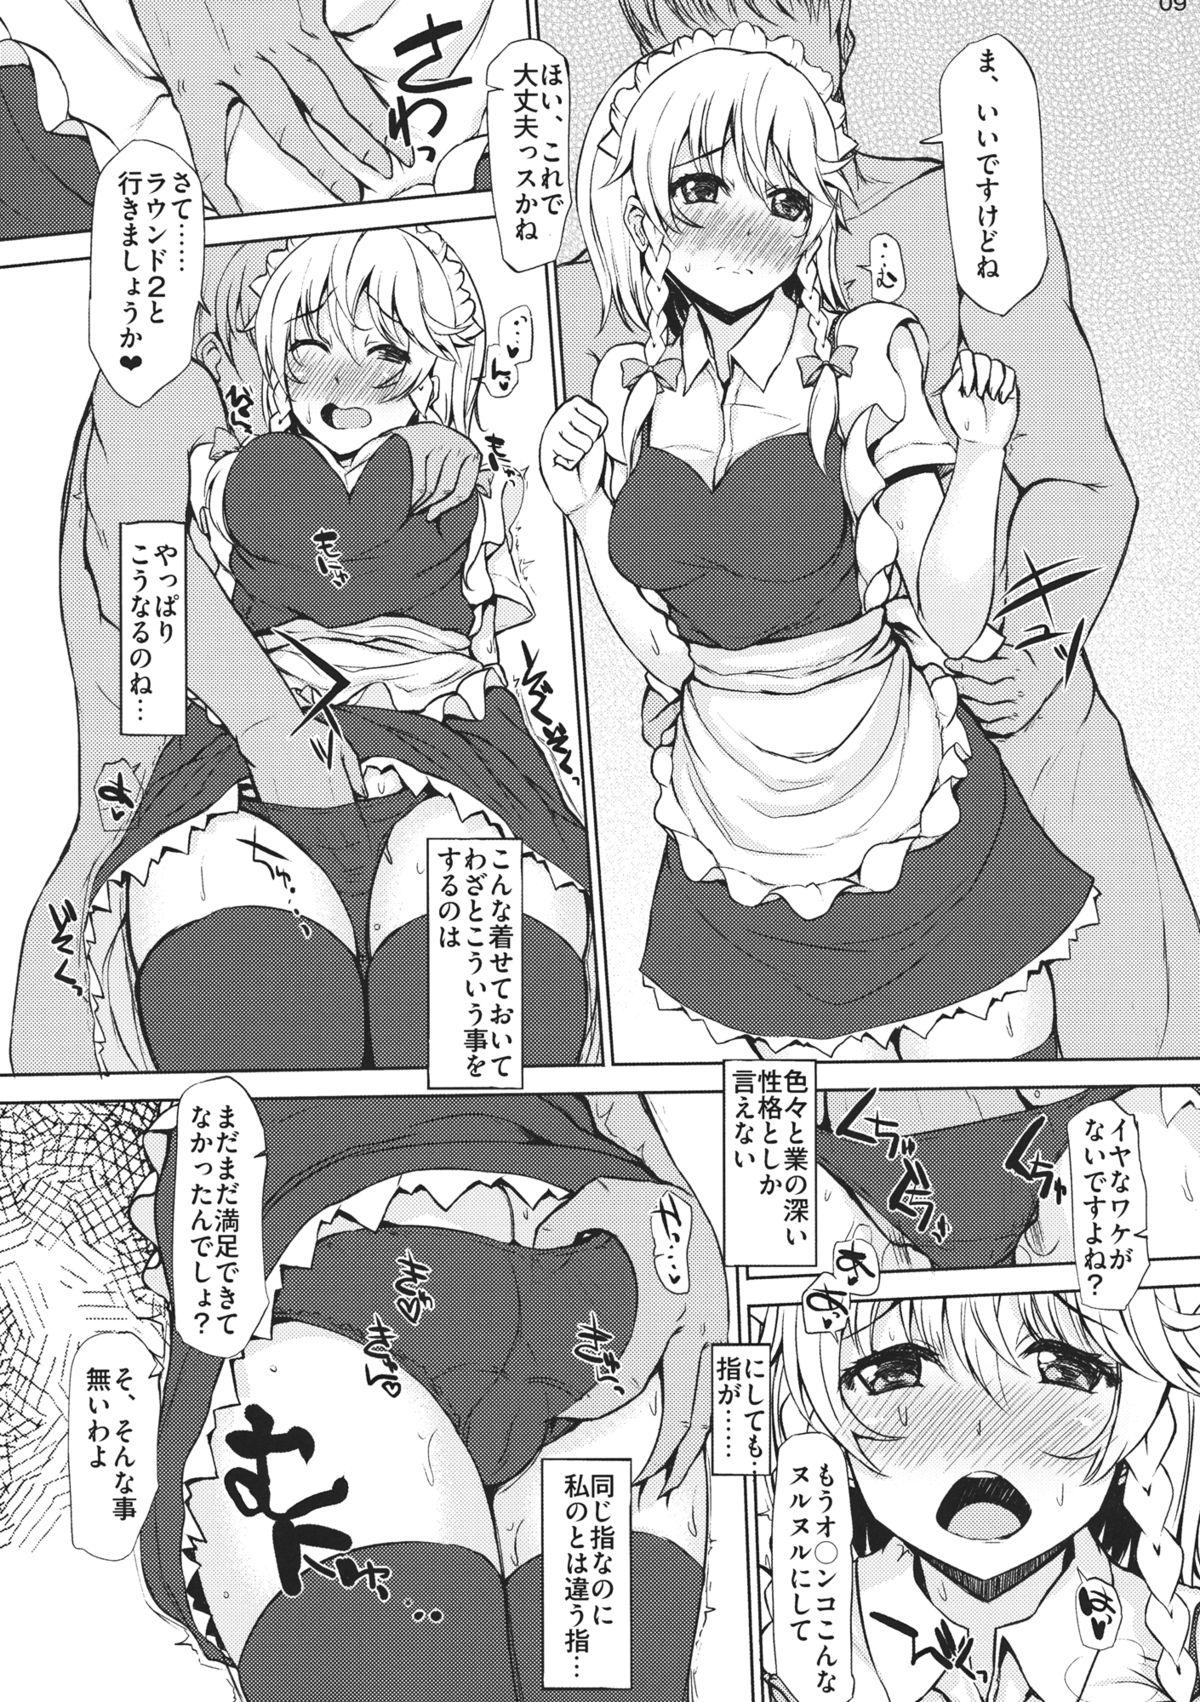 Missionary Position Porn Love Inside - Touhou project Nut - Page 8